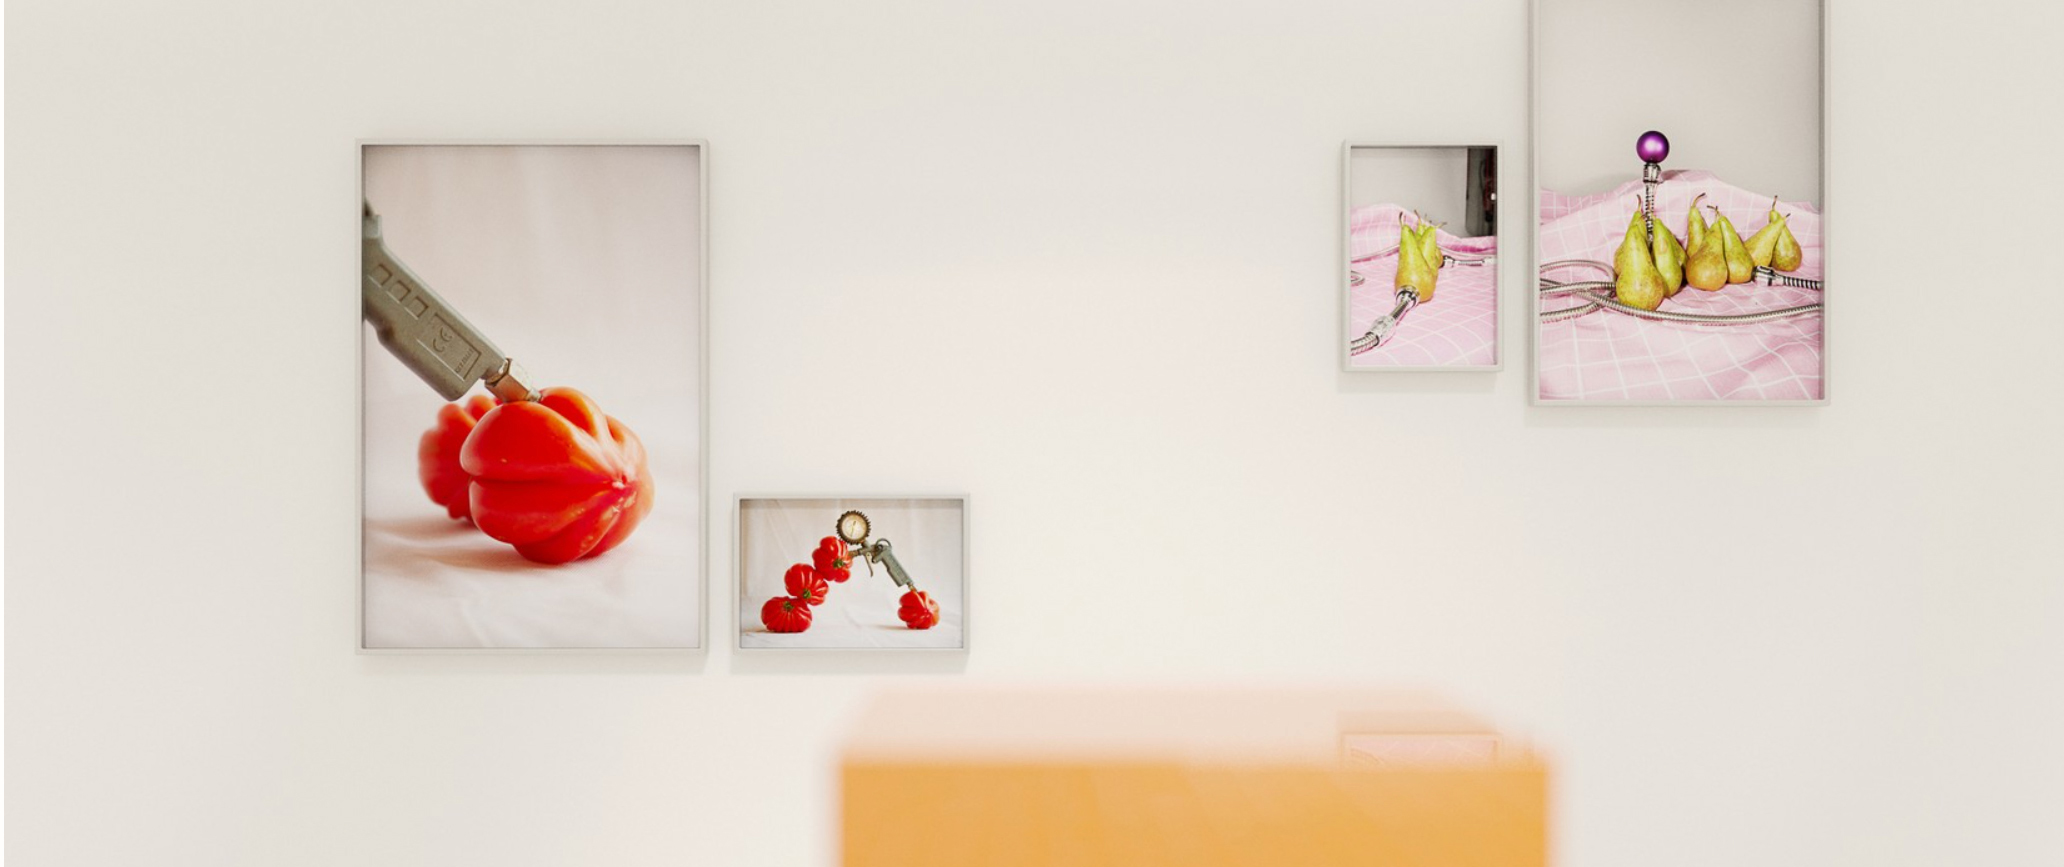 Exhibition shot of framed photographs showing coloured fruit, within a white gallery space.